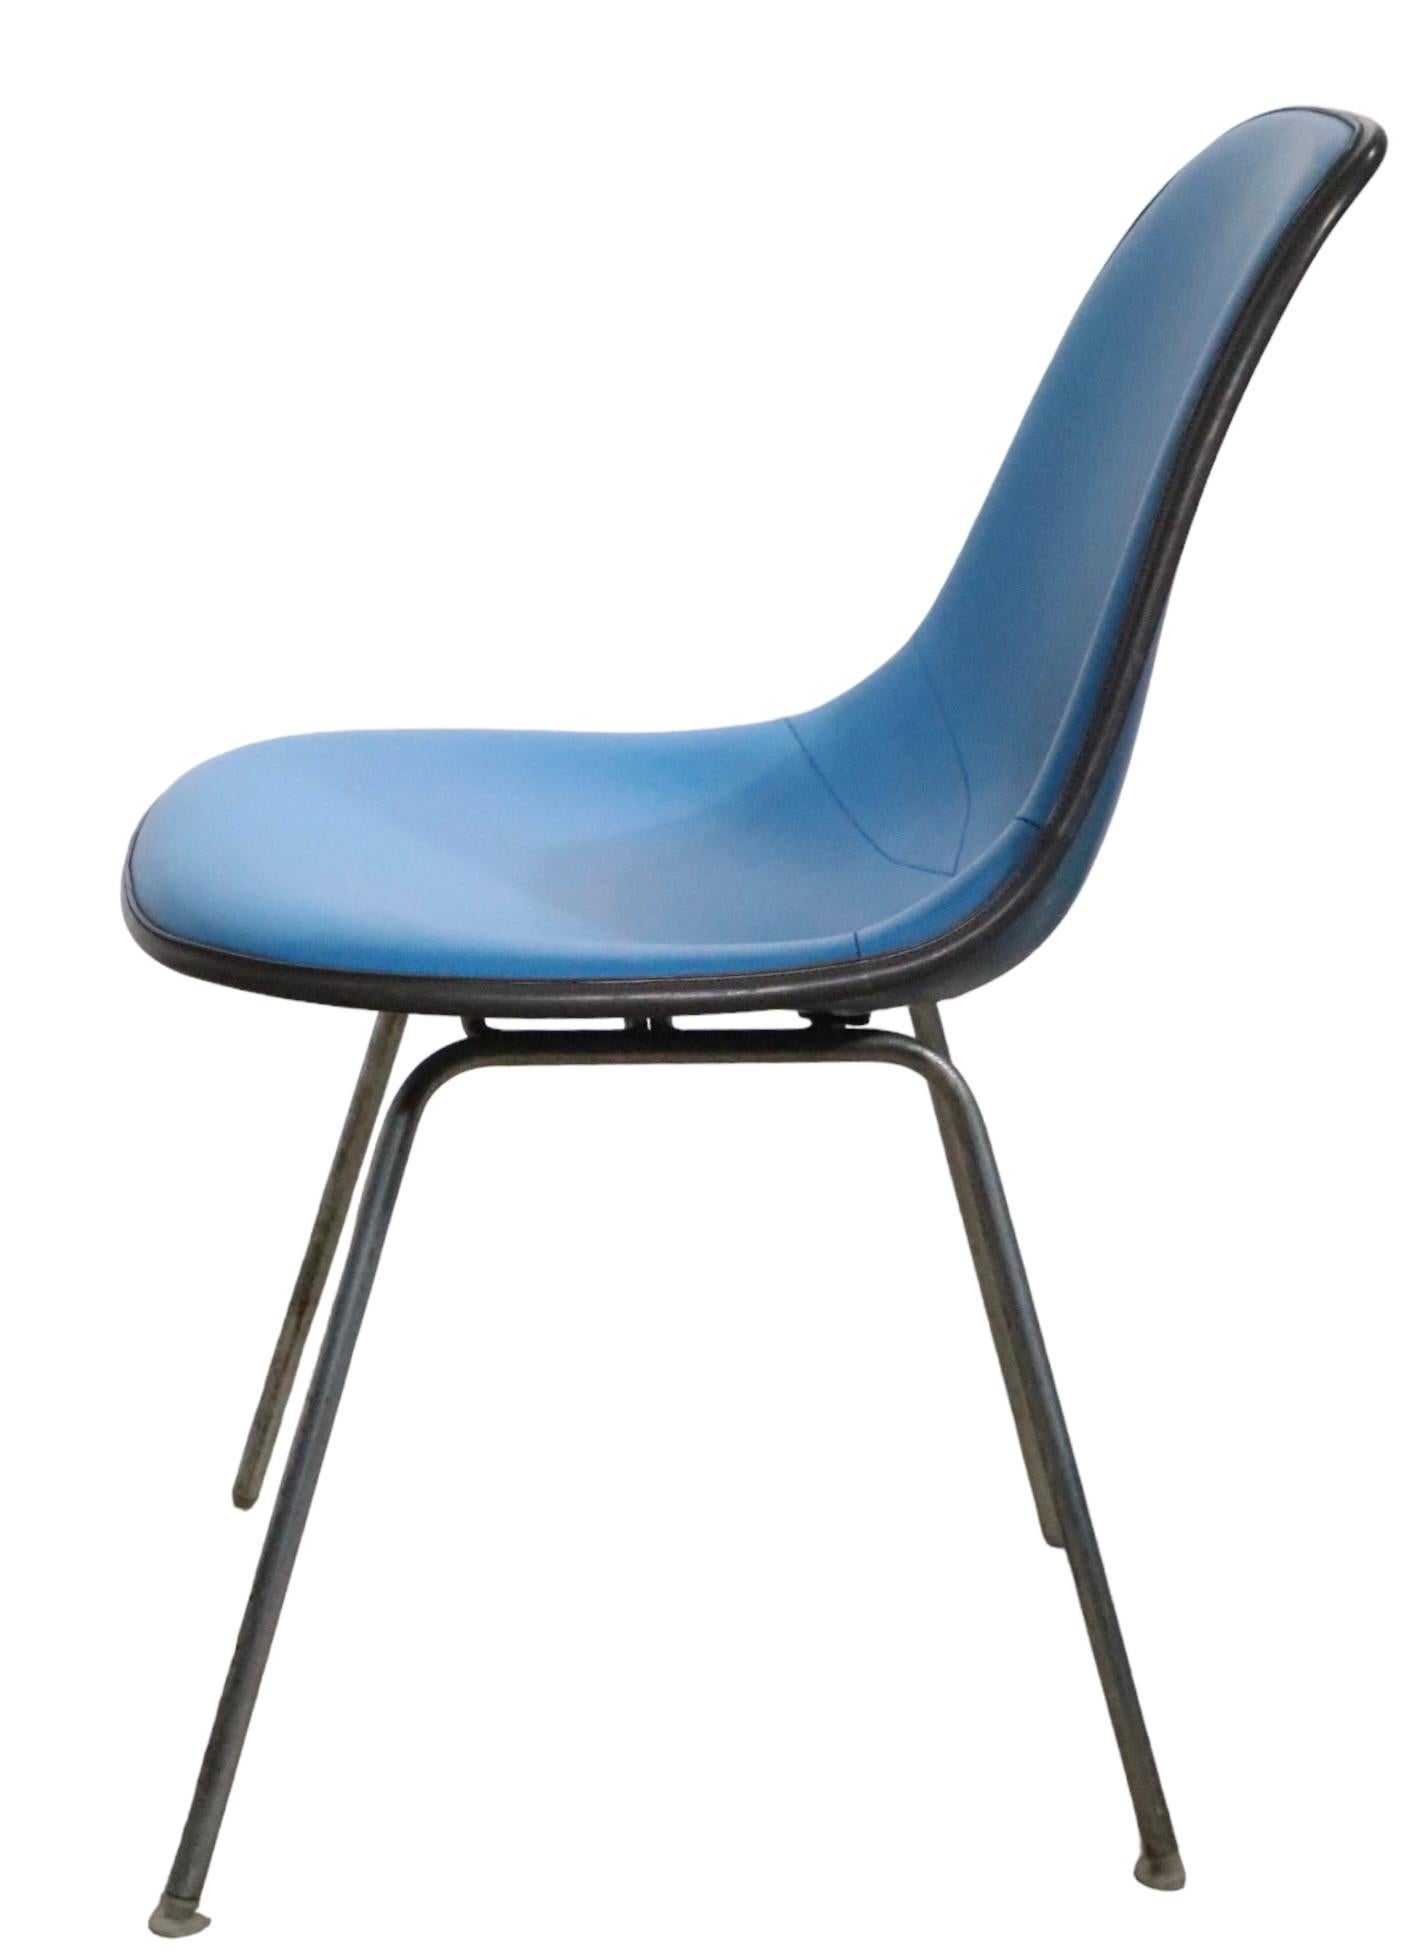 Classic Eames DSX chair in original blue vinyl upholstery, with black trim,  over a blue fiberglass shell. The chair its in very good, original, clean and ready to use conditional the plastic feet glides are present, photoshop tends t remove them